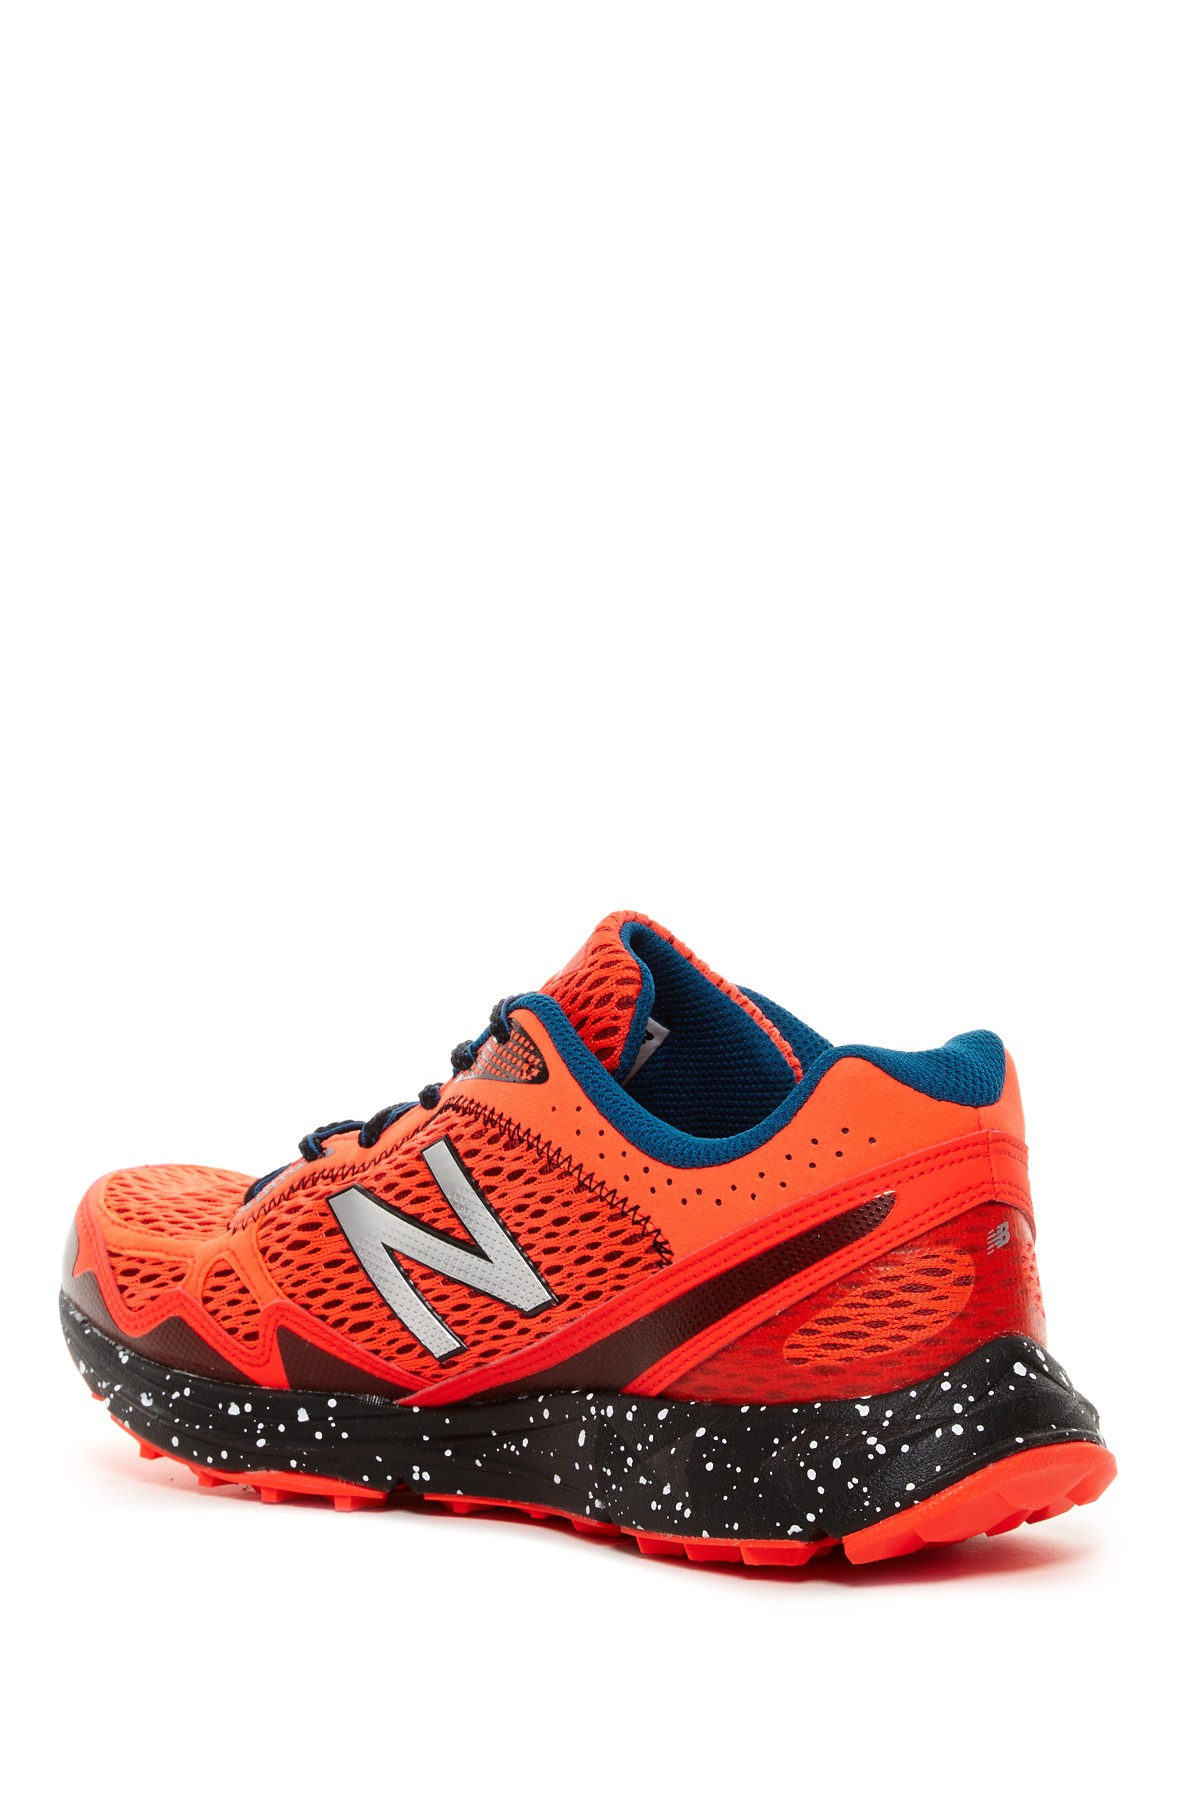 New Balance Synthetic 910 Trail Running Shoe for Men - Lyst